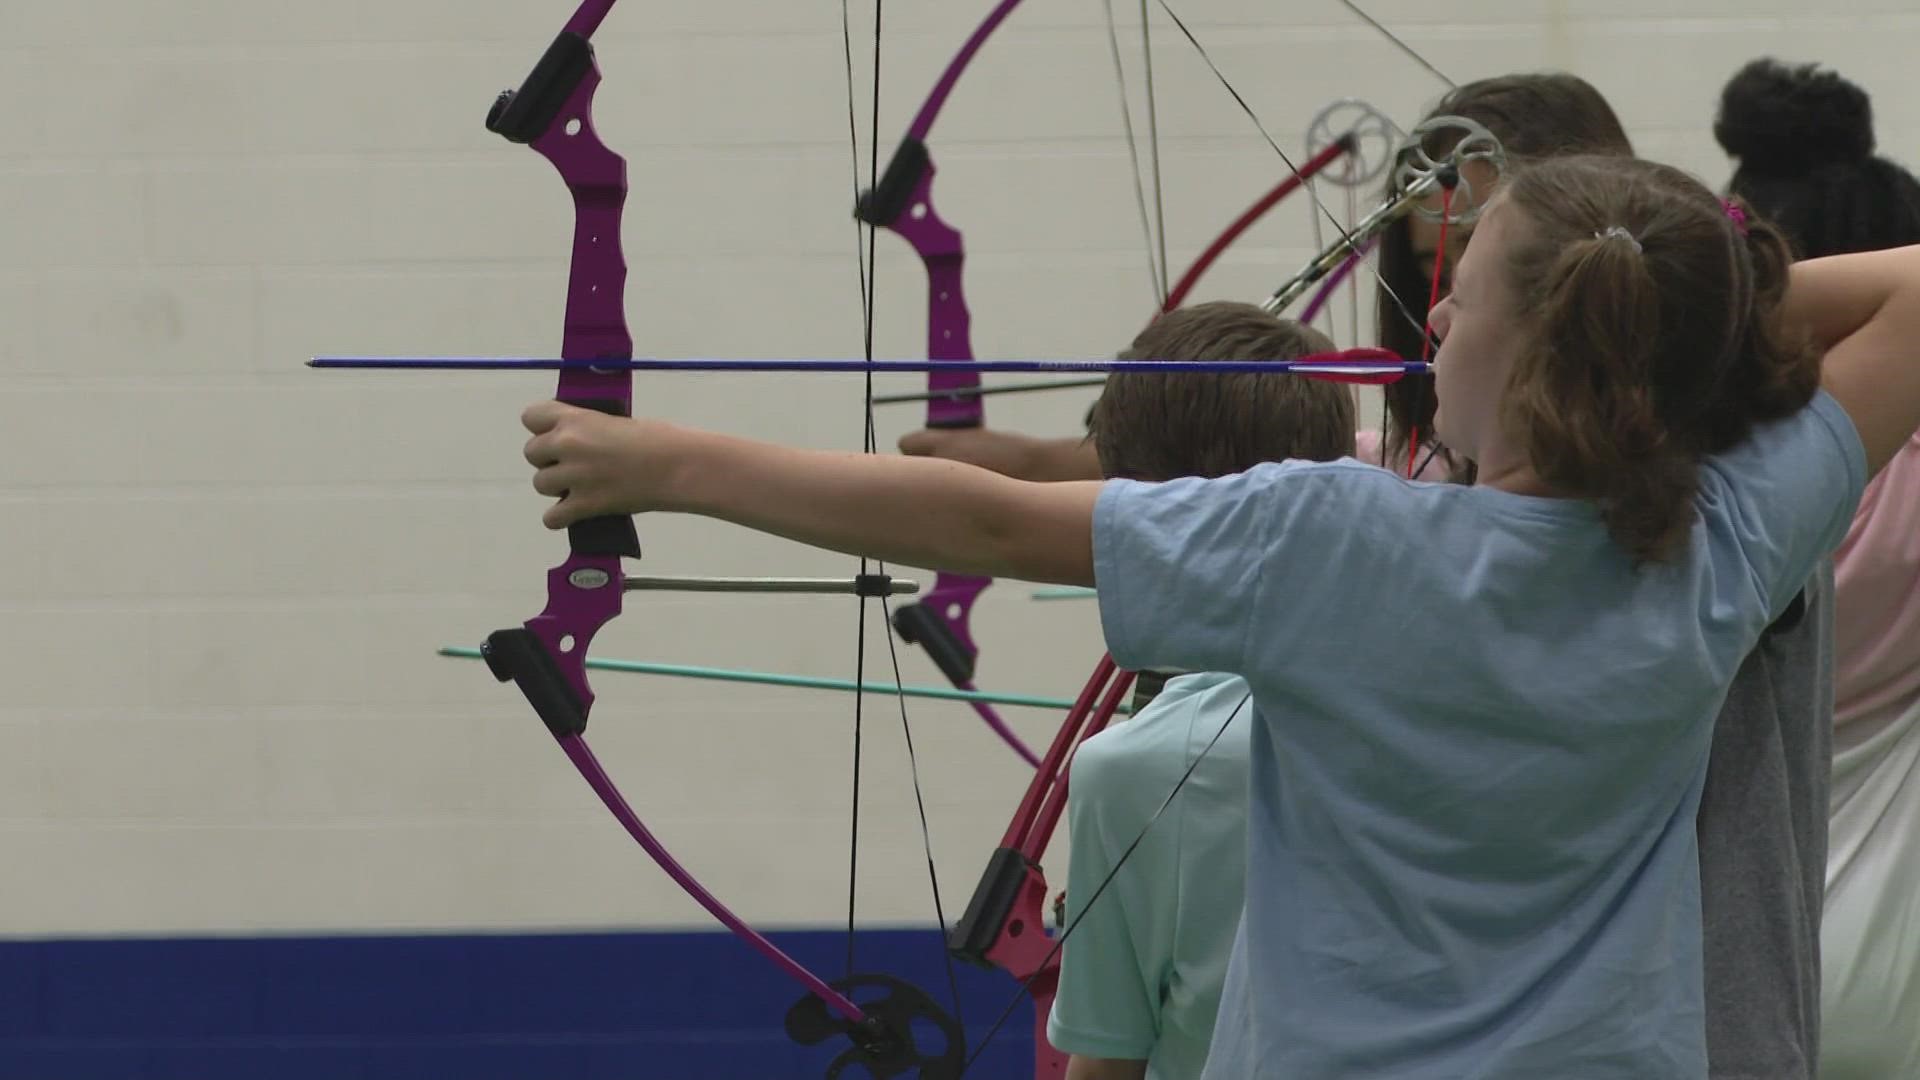 The arrows were flying as the Louisville Metro Police Activities League wrapped up their archery program at the South Louisville Community Center.